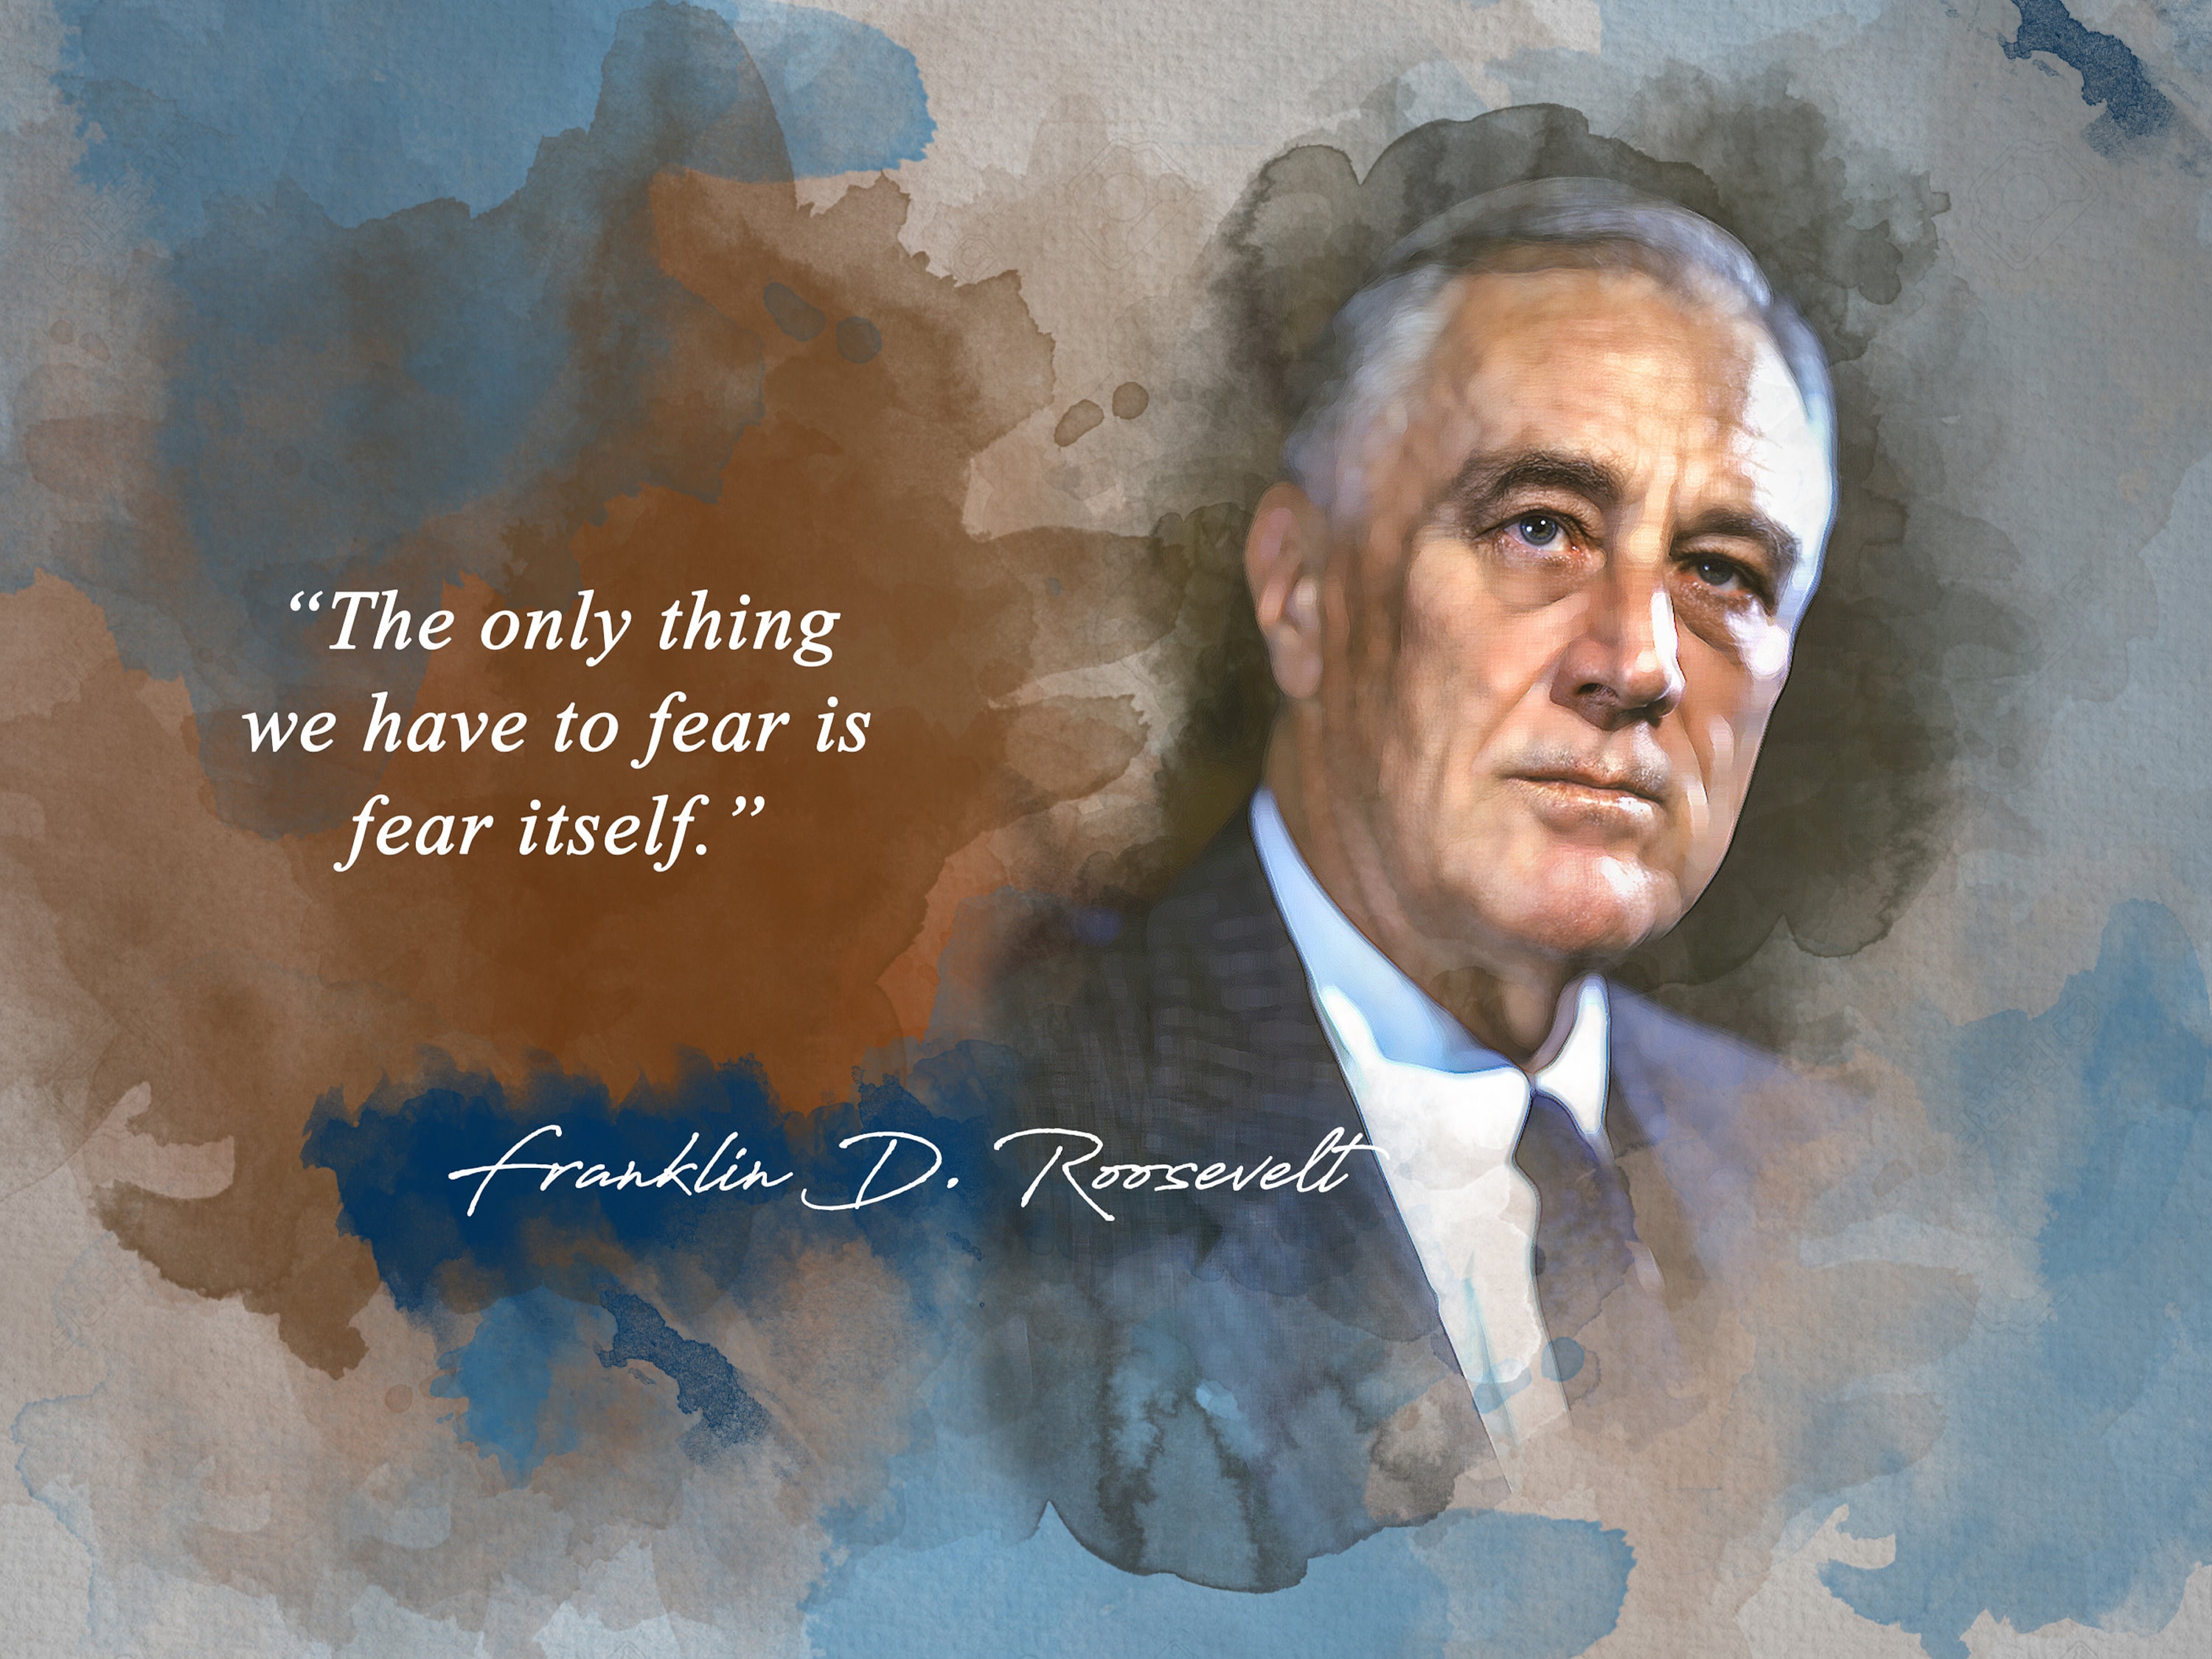 Roosevelt QuoteFDR QuoteFear ItselfPresident | Etsy